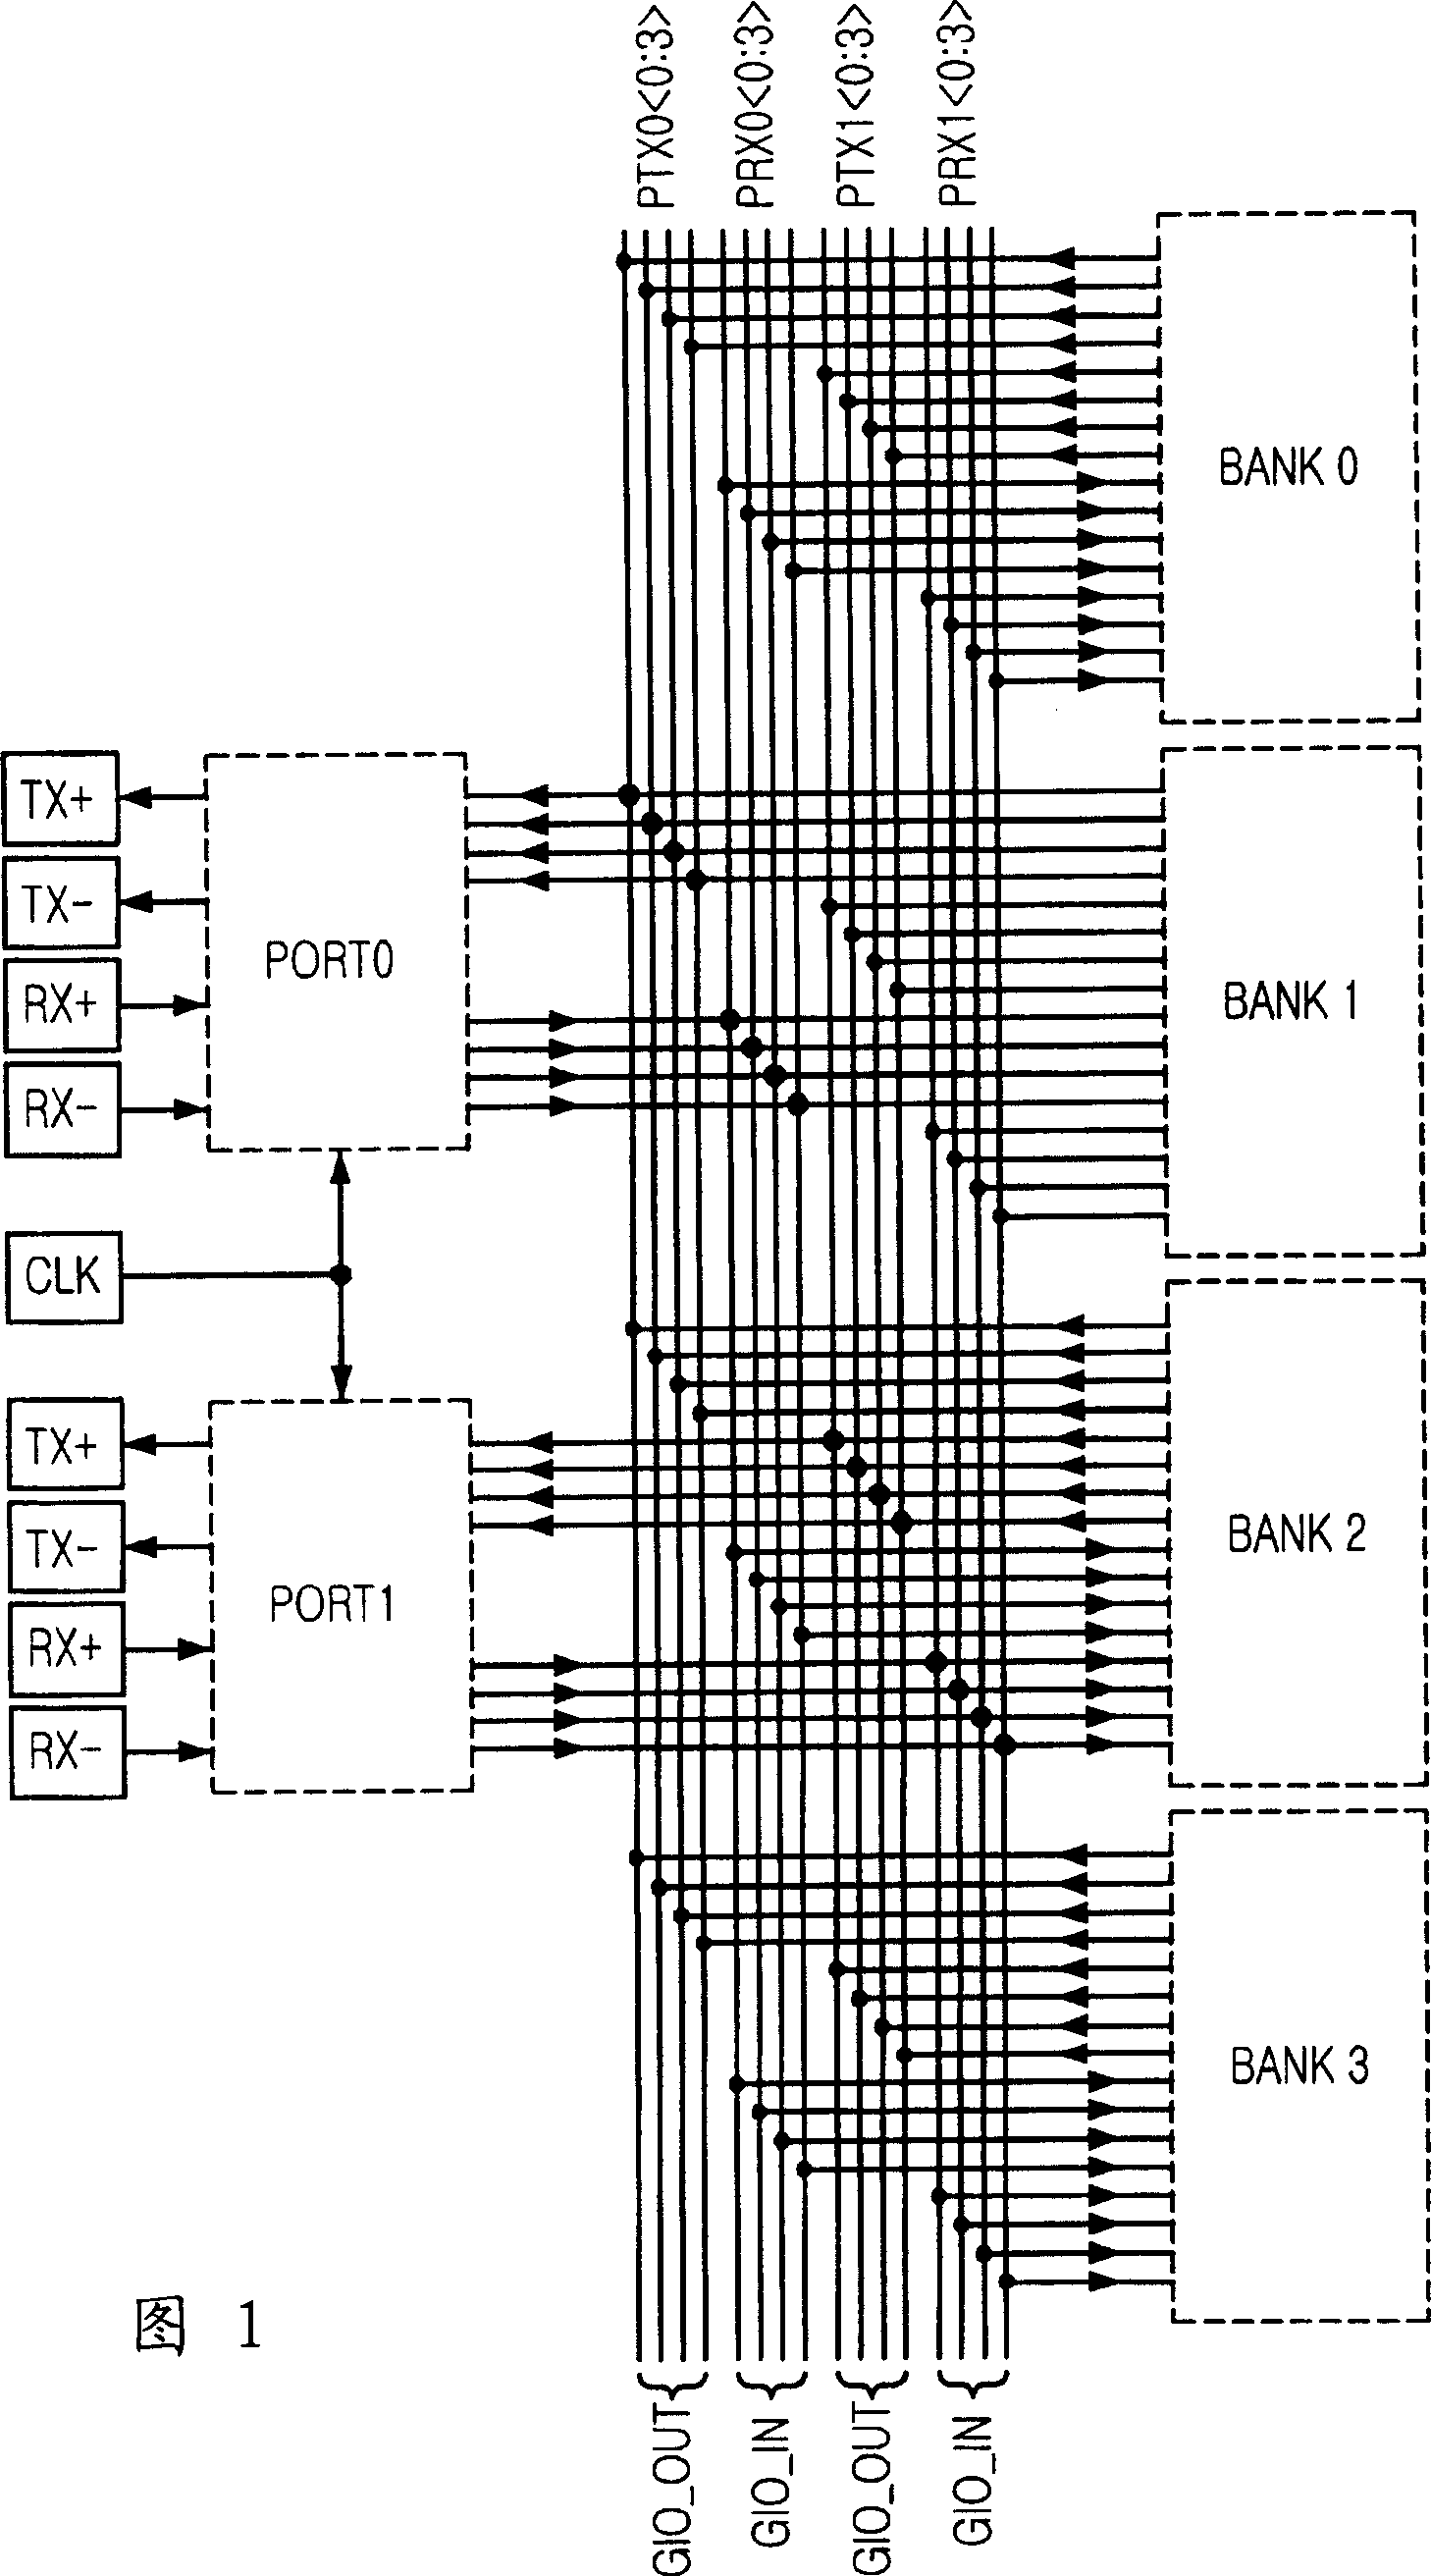 Multi-port memory device with serial input/output interface